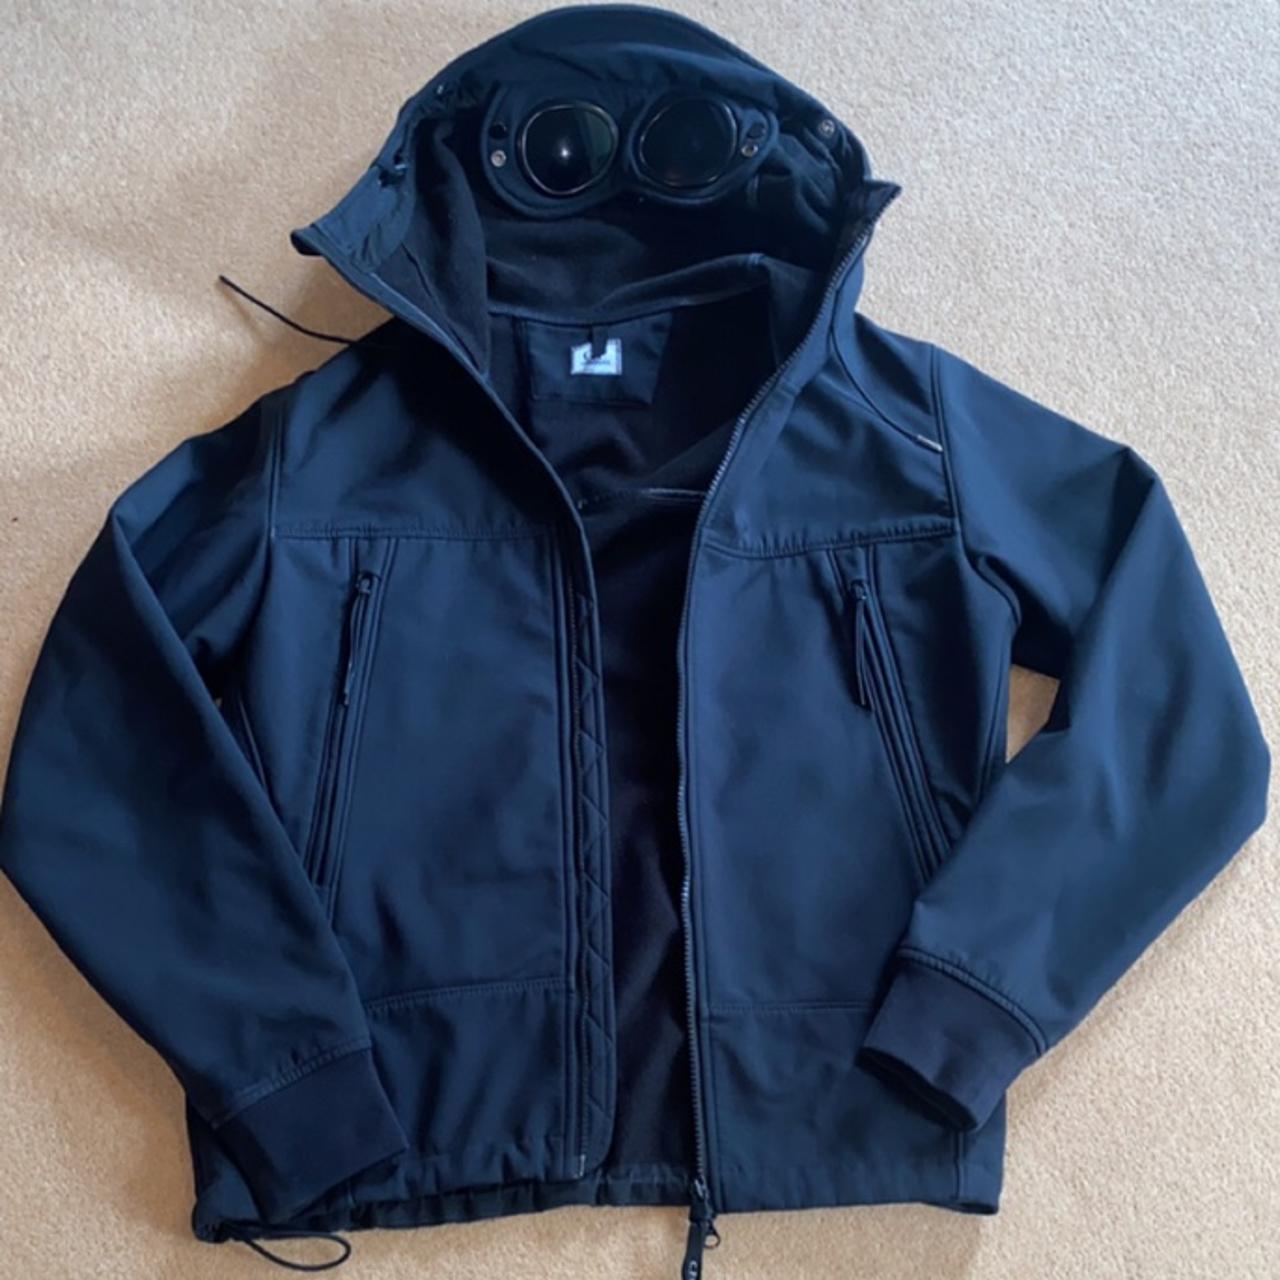 Black CP soft shell jacket. Overall good condition... - Depop